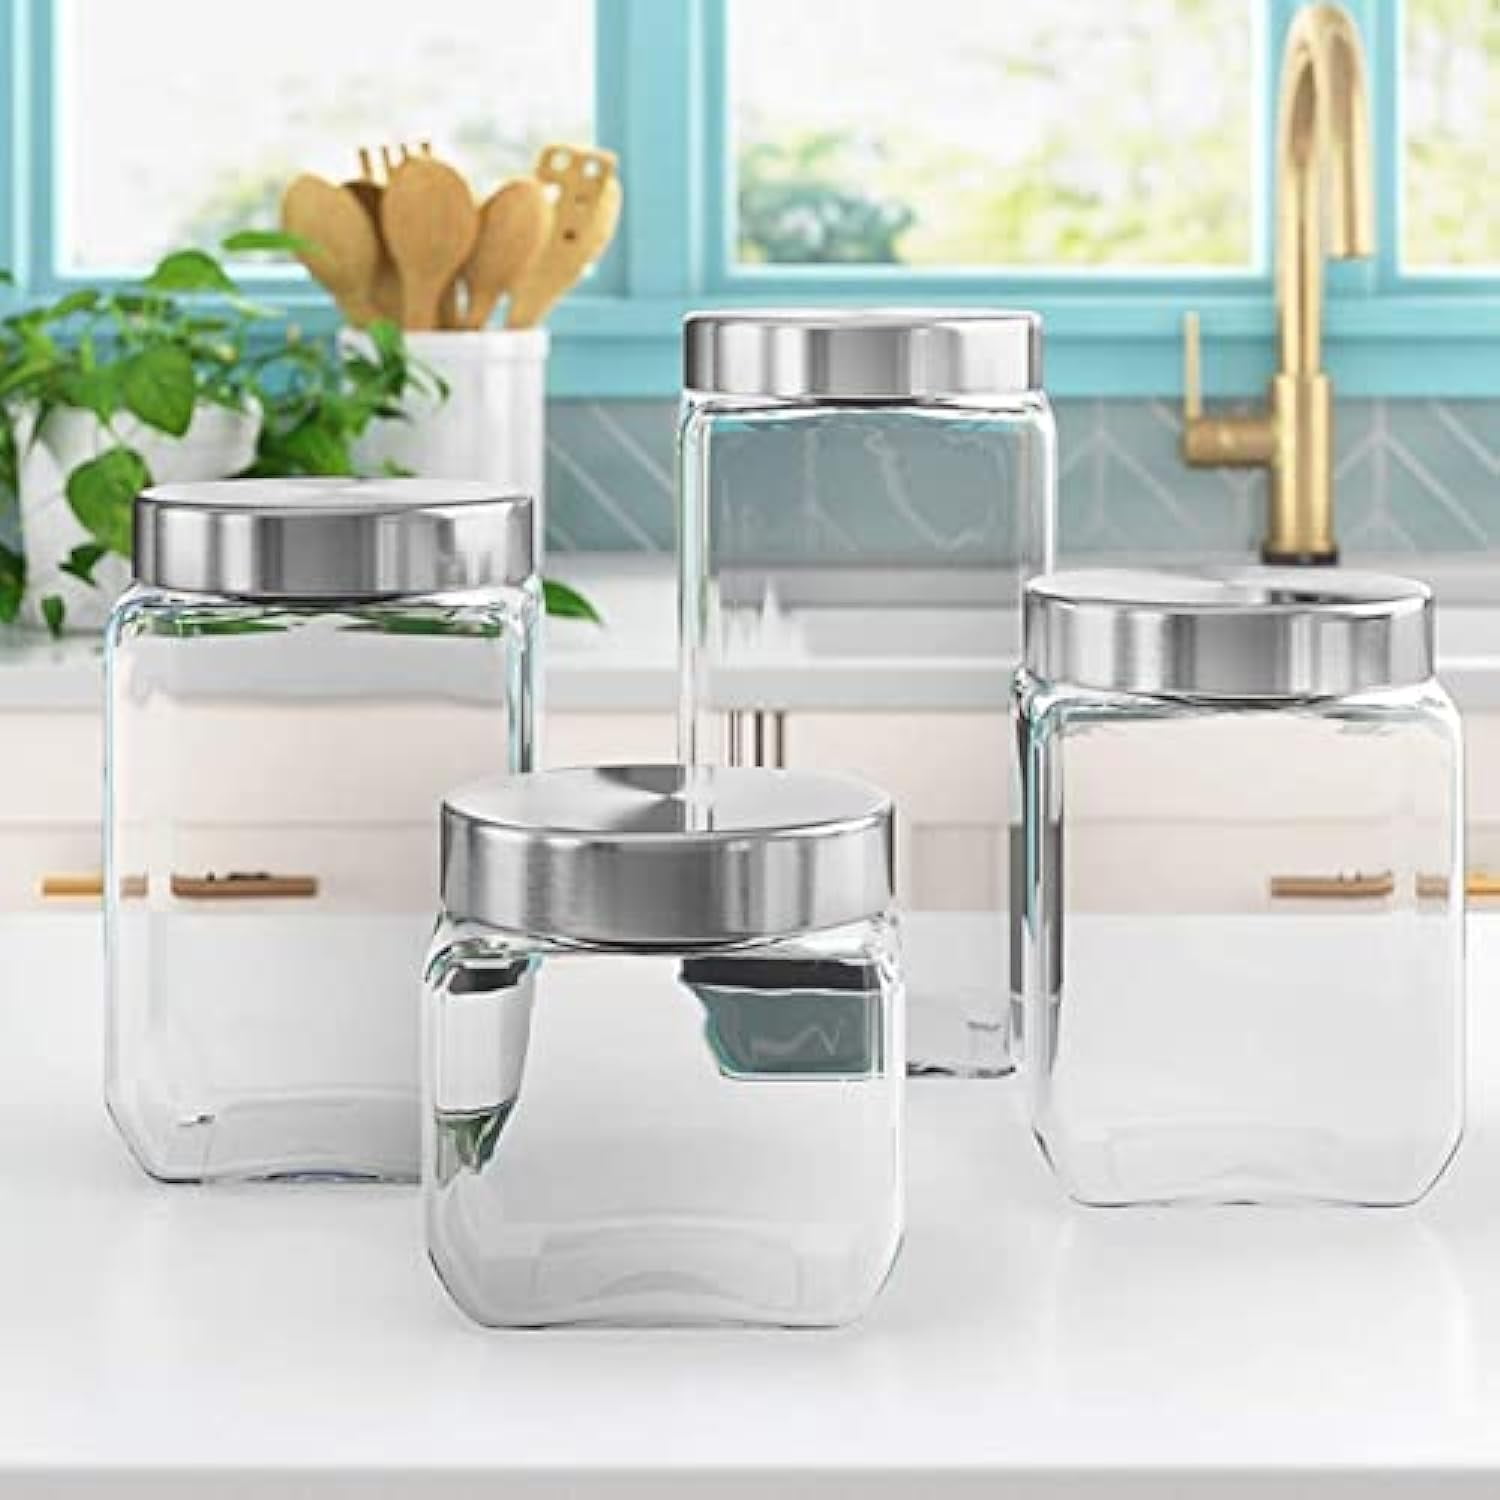 3pc Canister Sets for Kitchen Counter + Labels & Marker - Glass Cookie Jars  with Airtight Lids - Food Storage Containers with Lids Airtight for Pantry  - Flour, Sugar, Coffee, Cookies, etc.